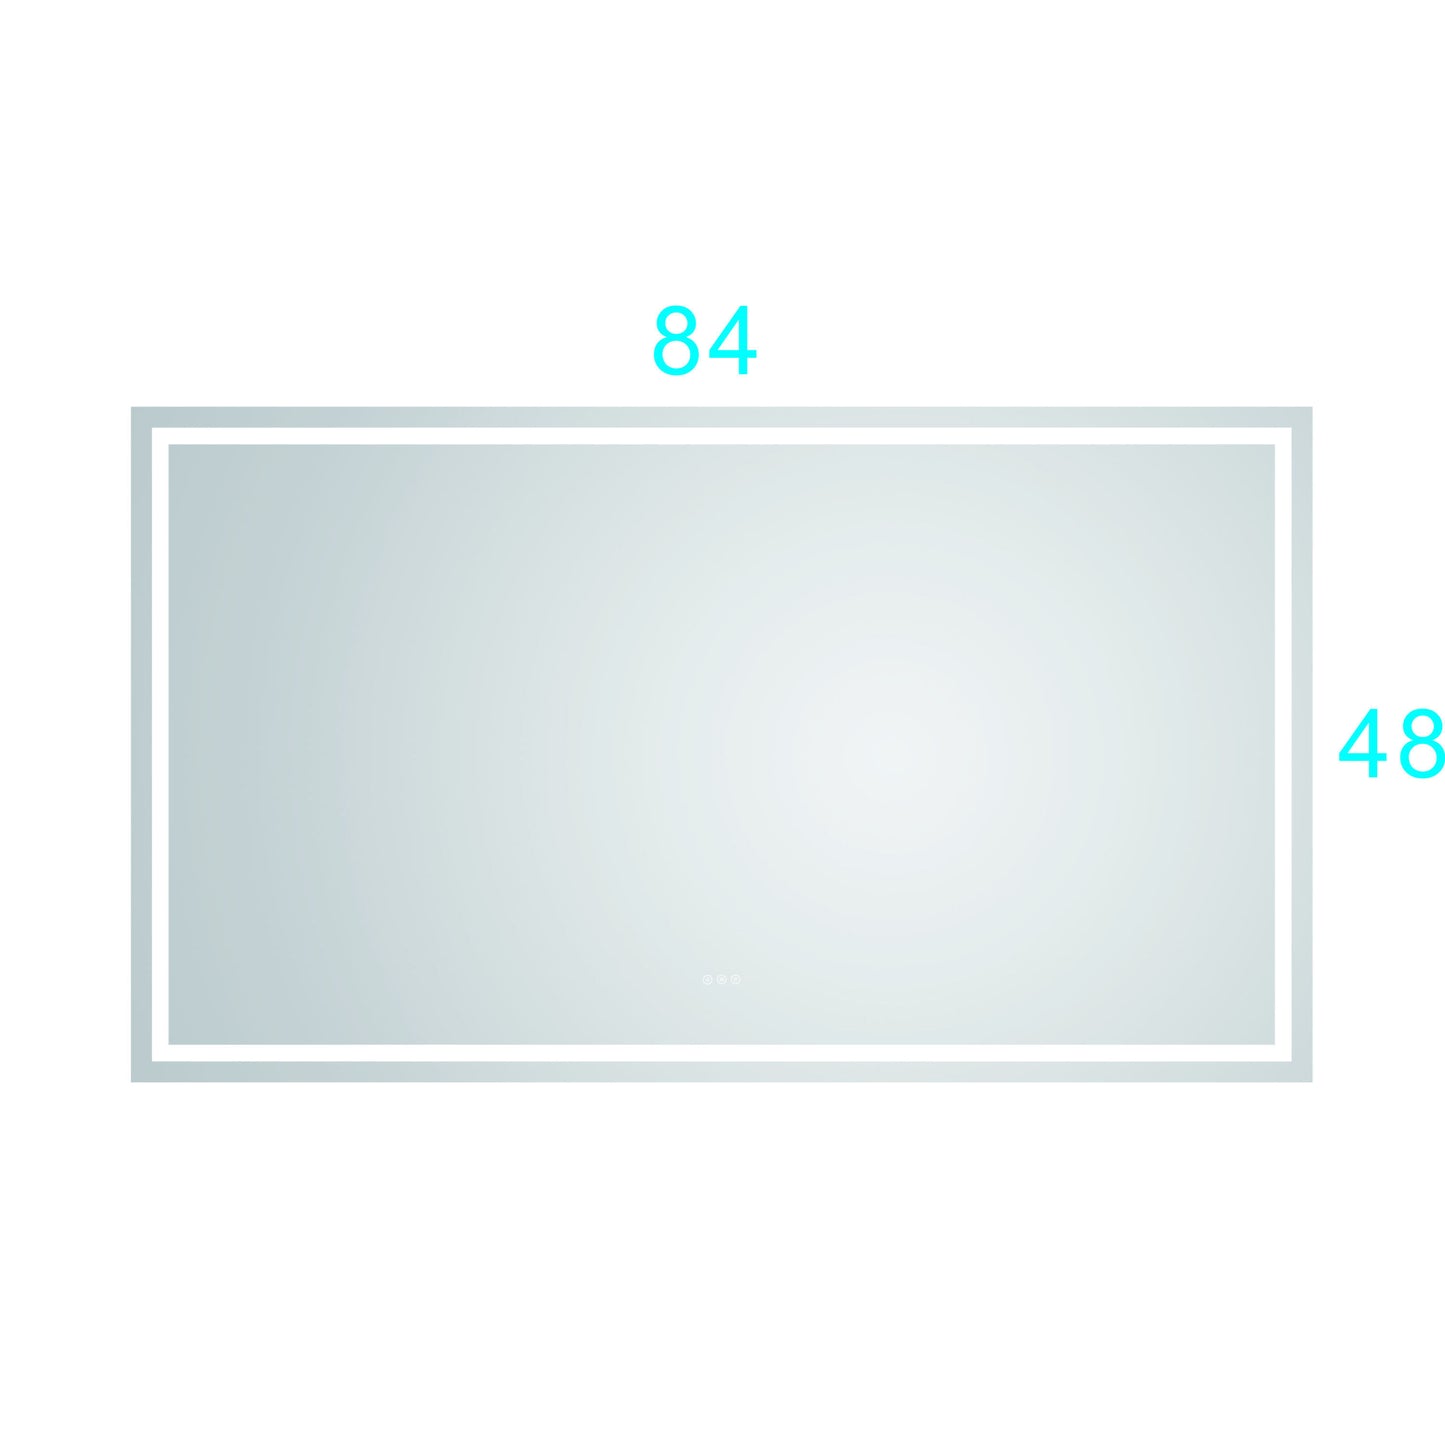 84*48 LED Lighted Bathroom Wall Mounted Mirror with High Lumen+Anti-Fog Separately Control

bedroom full-length mirror  bathroom led mirror  hair salon mirror